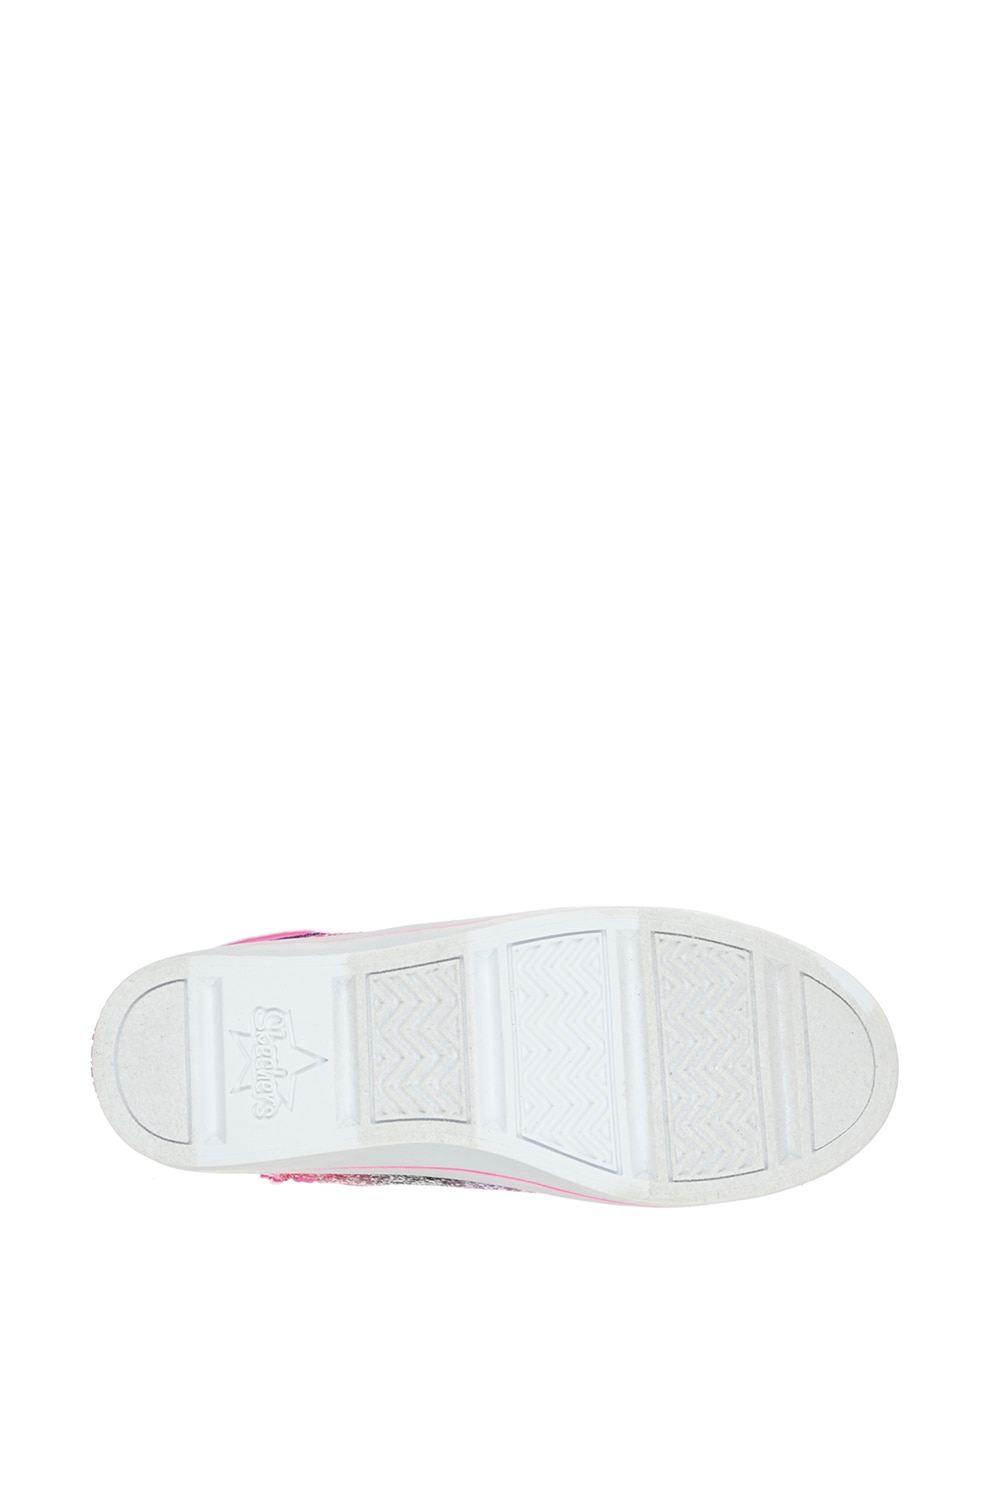 skechers twinkle toes heart and sole